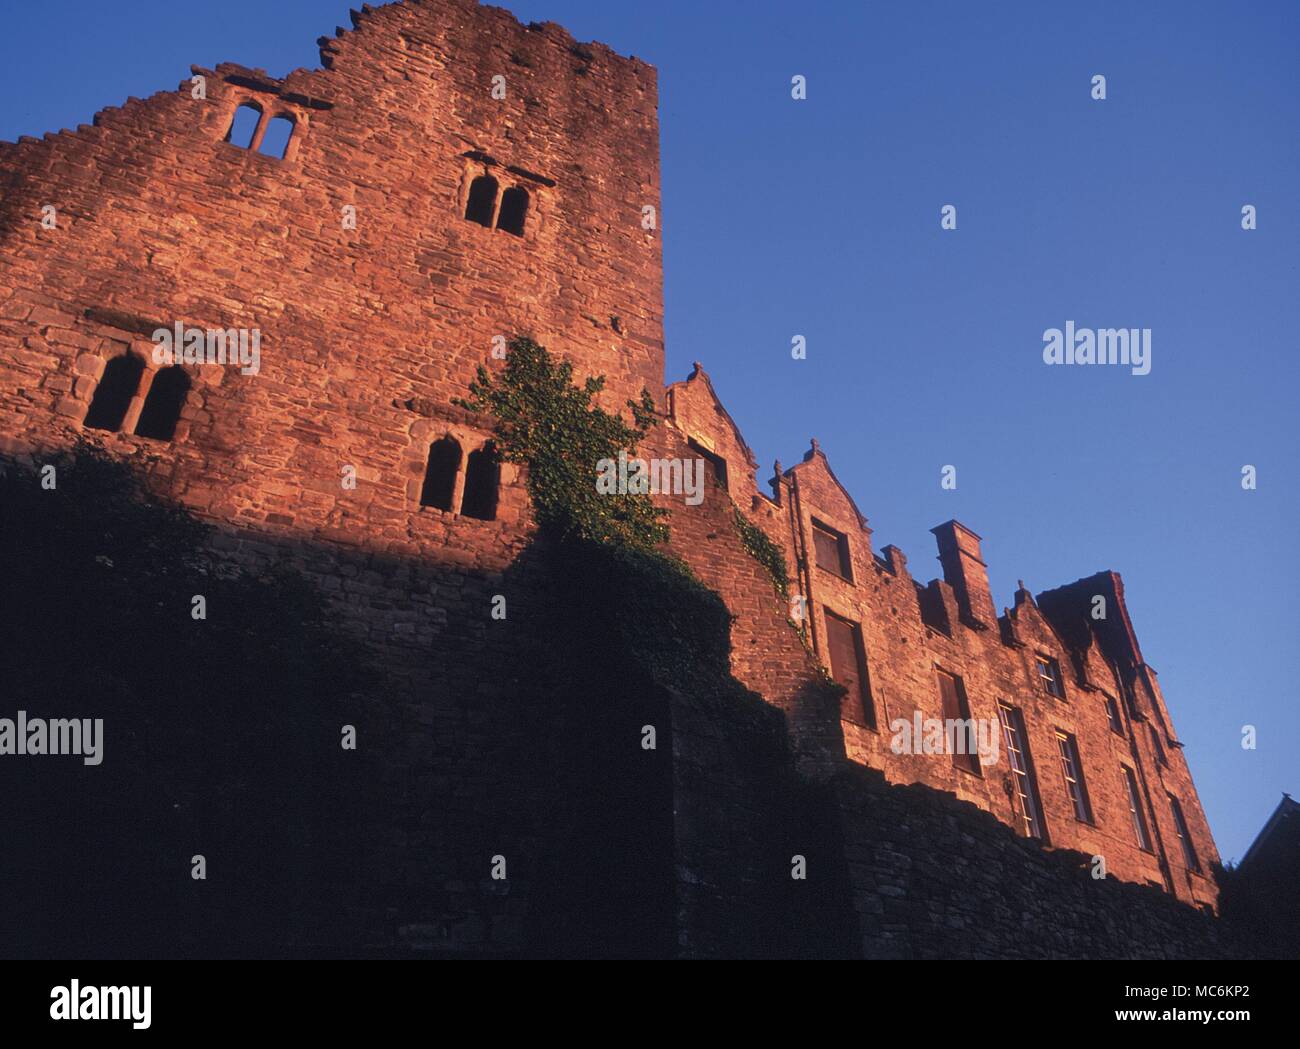 Hauntings - Hay on Wye. The old castle is said to be haunted by an old witch (even said to have been built by her using magical methods). Stock Photo